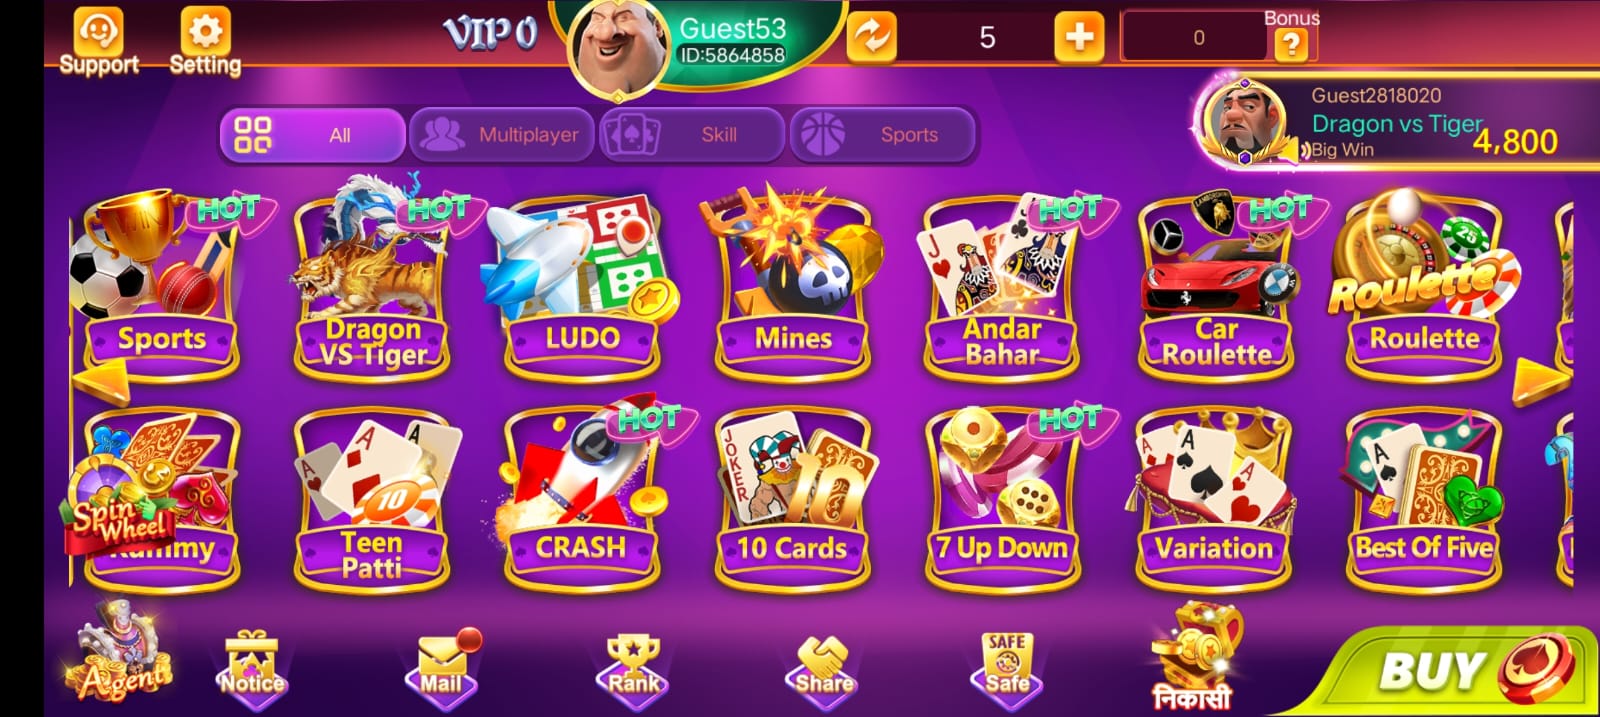 Available Games on Teen Patti Live Apk